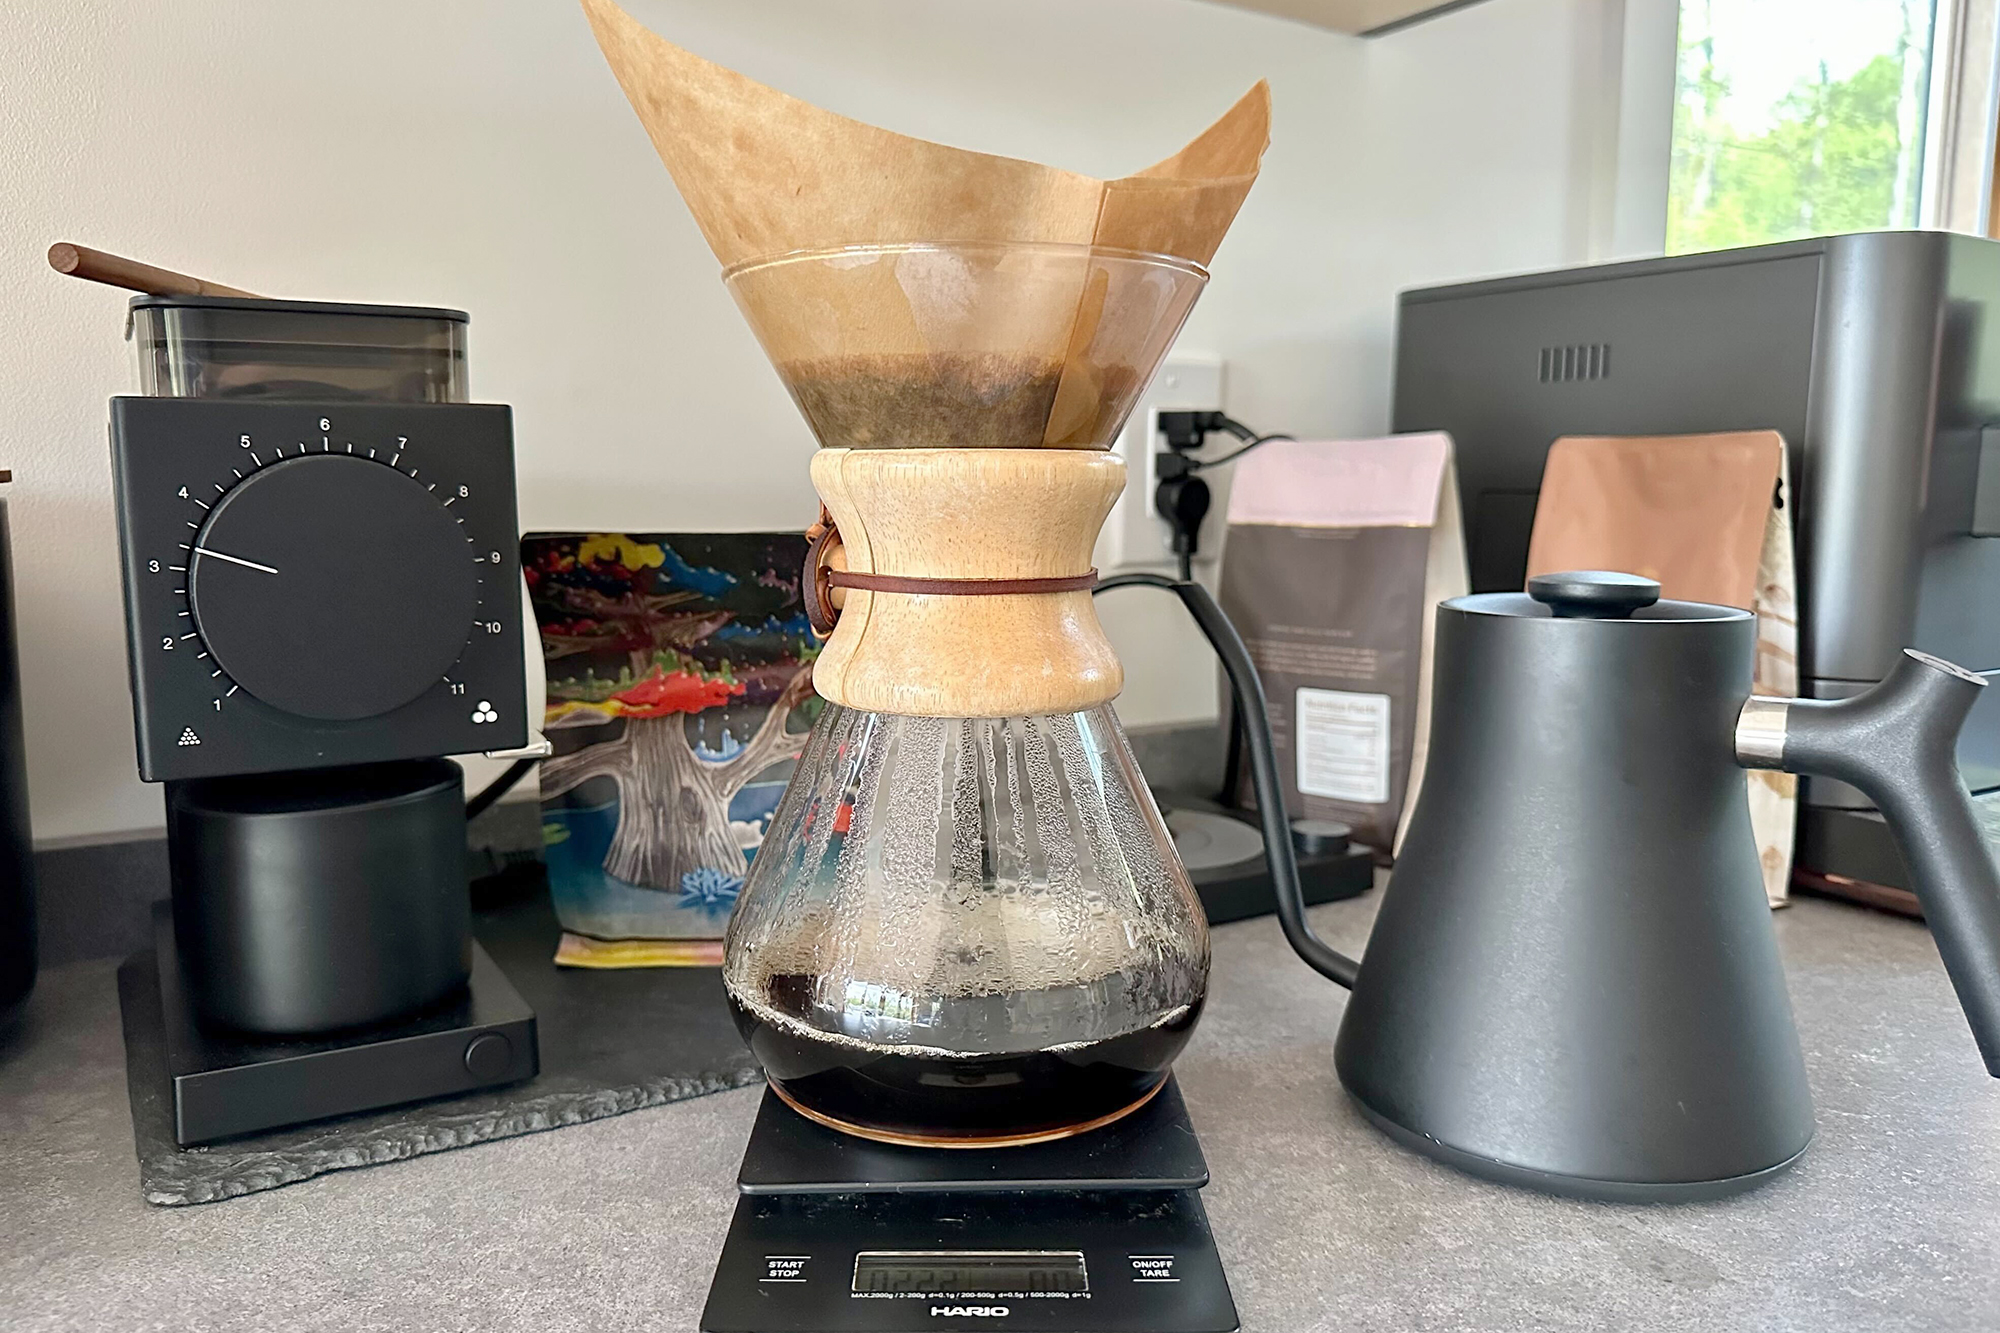 Chemex pour-over coffee maker on a scale with Fellow grinder and gooseneck kettle